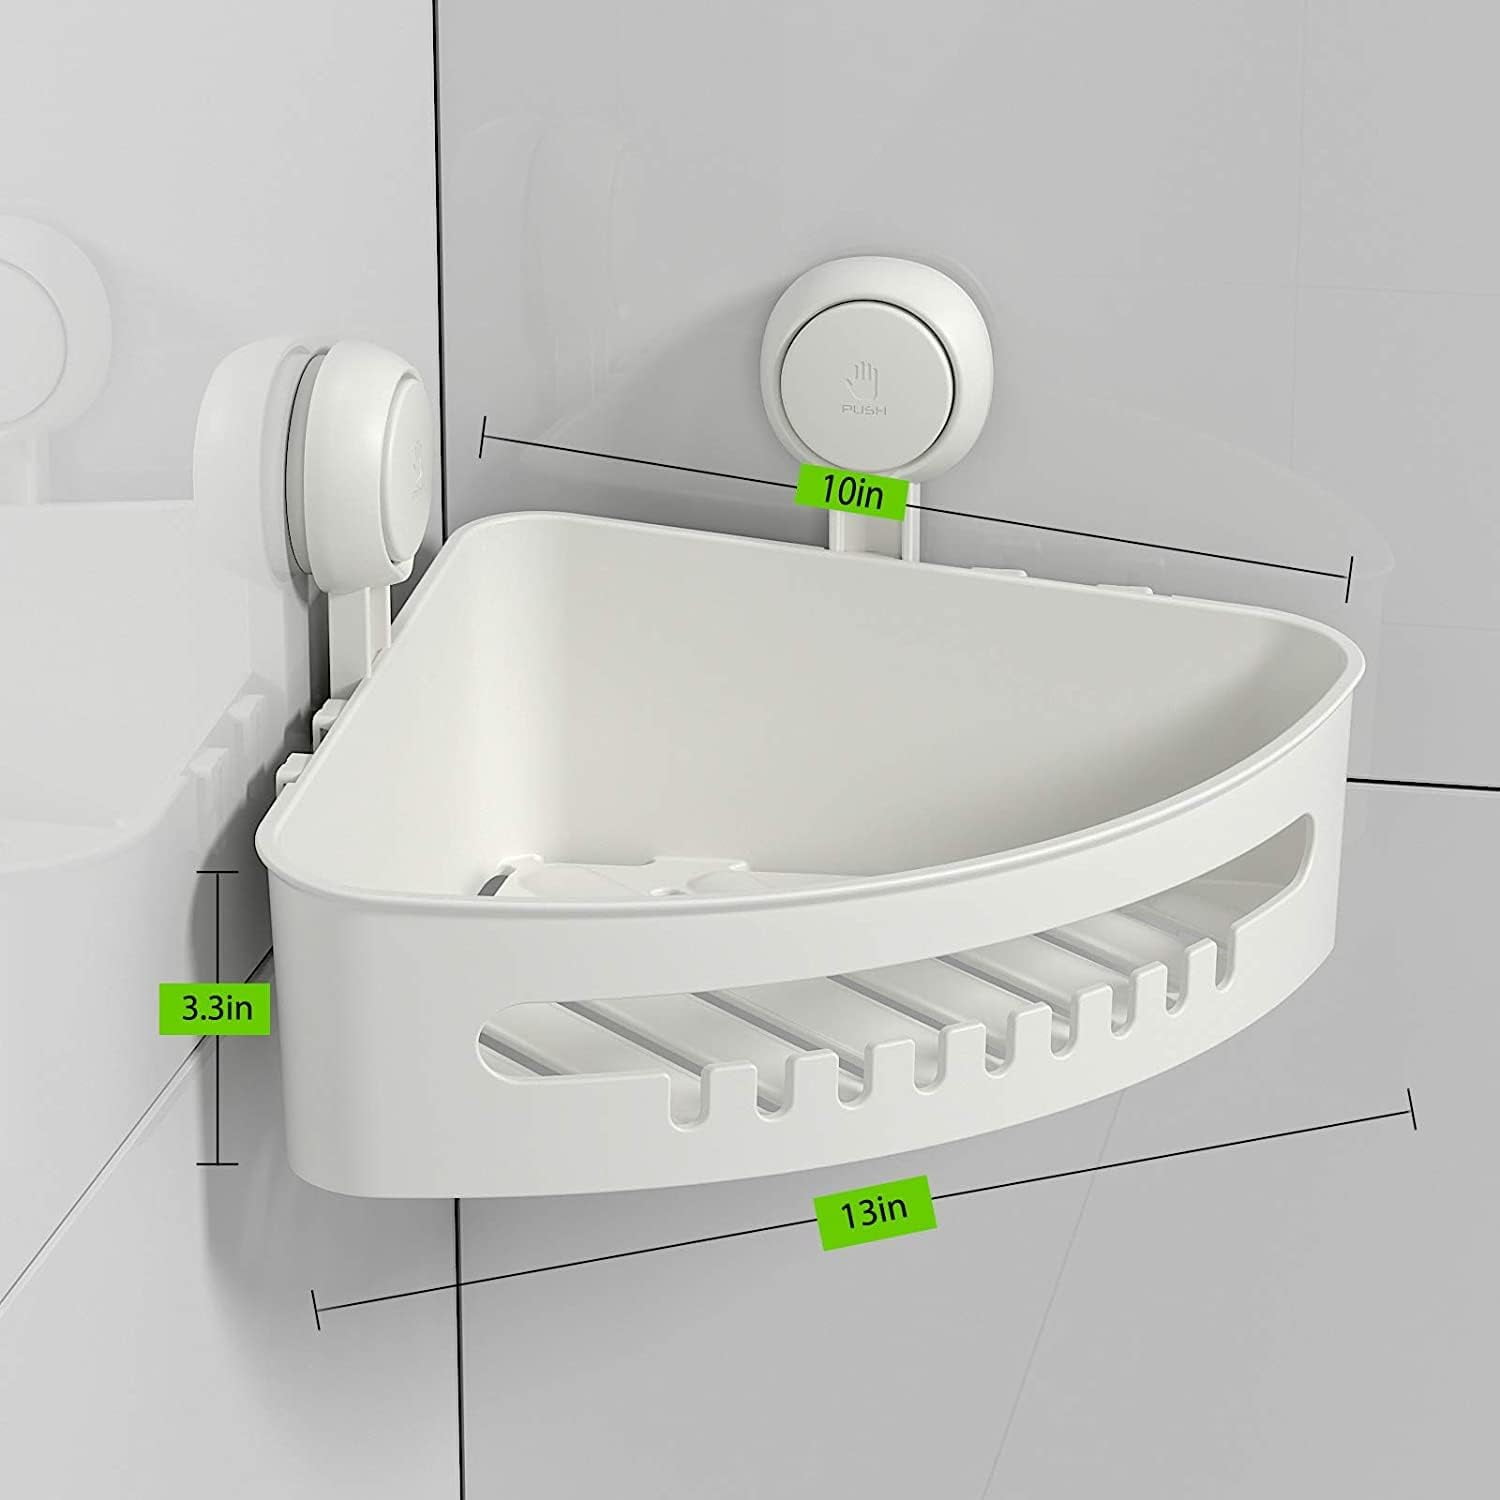 Removable Suction Cup Shower Caddy – luxear.shop